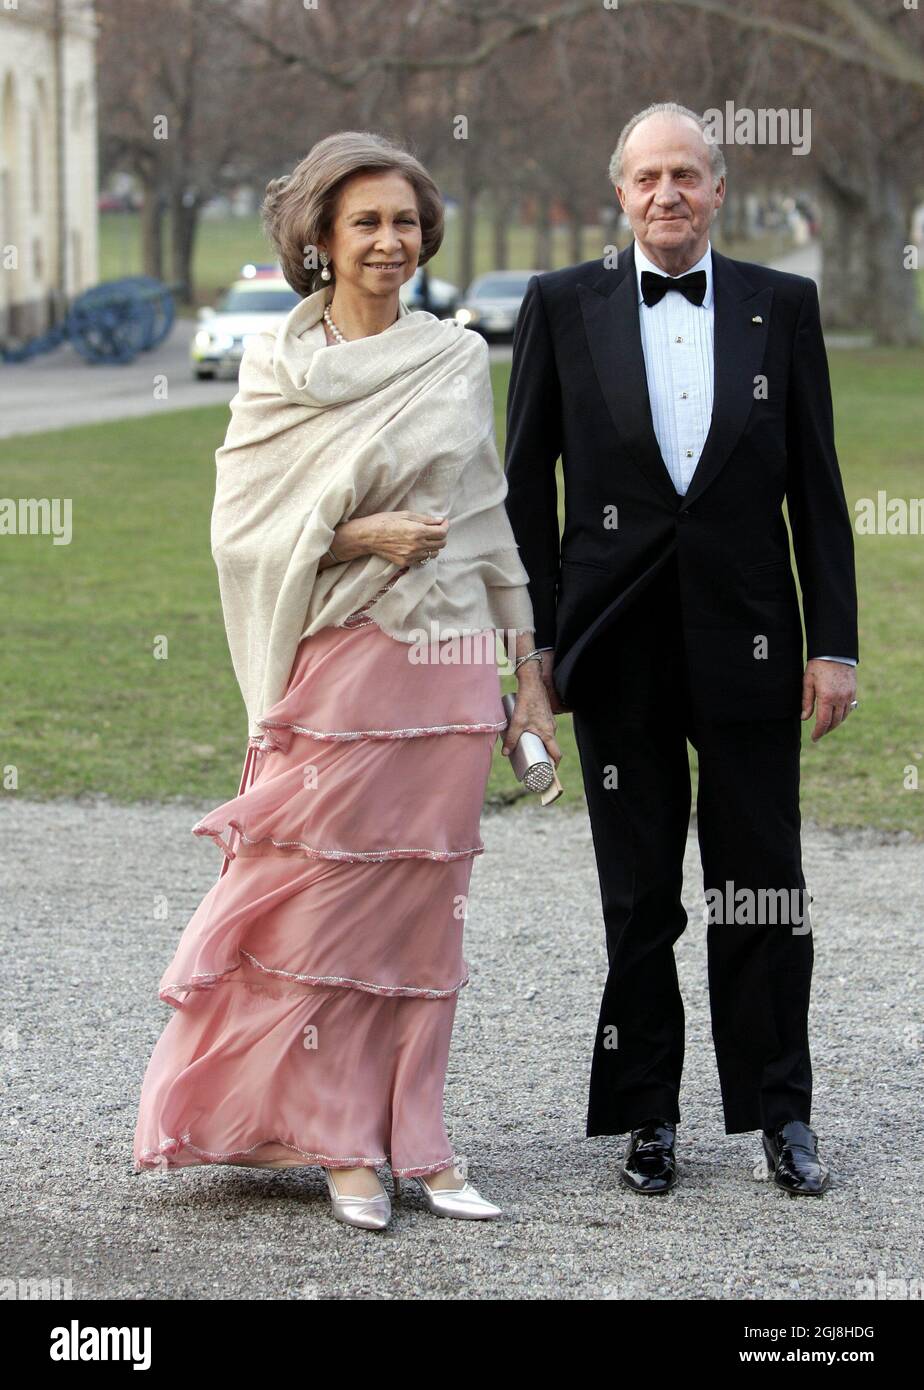 STOCKHOLM 20060429 Queen Sofia and King Juan Carlos of Spain arrive to King Carl Gustaf's private dinner celebration at the Drottningholm Palace outside Stockholm, Sweden, April 29, 2006. 300 guests were invited to the private dinner Saturday. King Carl Gustaf of Sweden officially celebrates his 60th birthday on his birthday Sunday the 30th of April. Photo Maja Suslin / SCANPIX Code 60800 Stock Photo